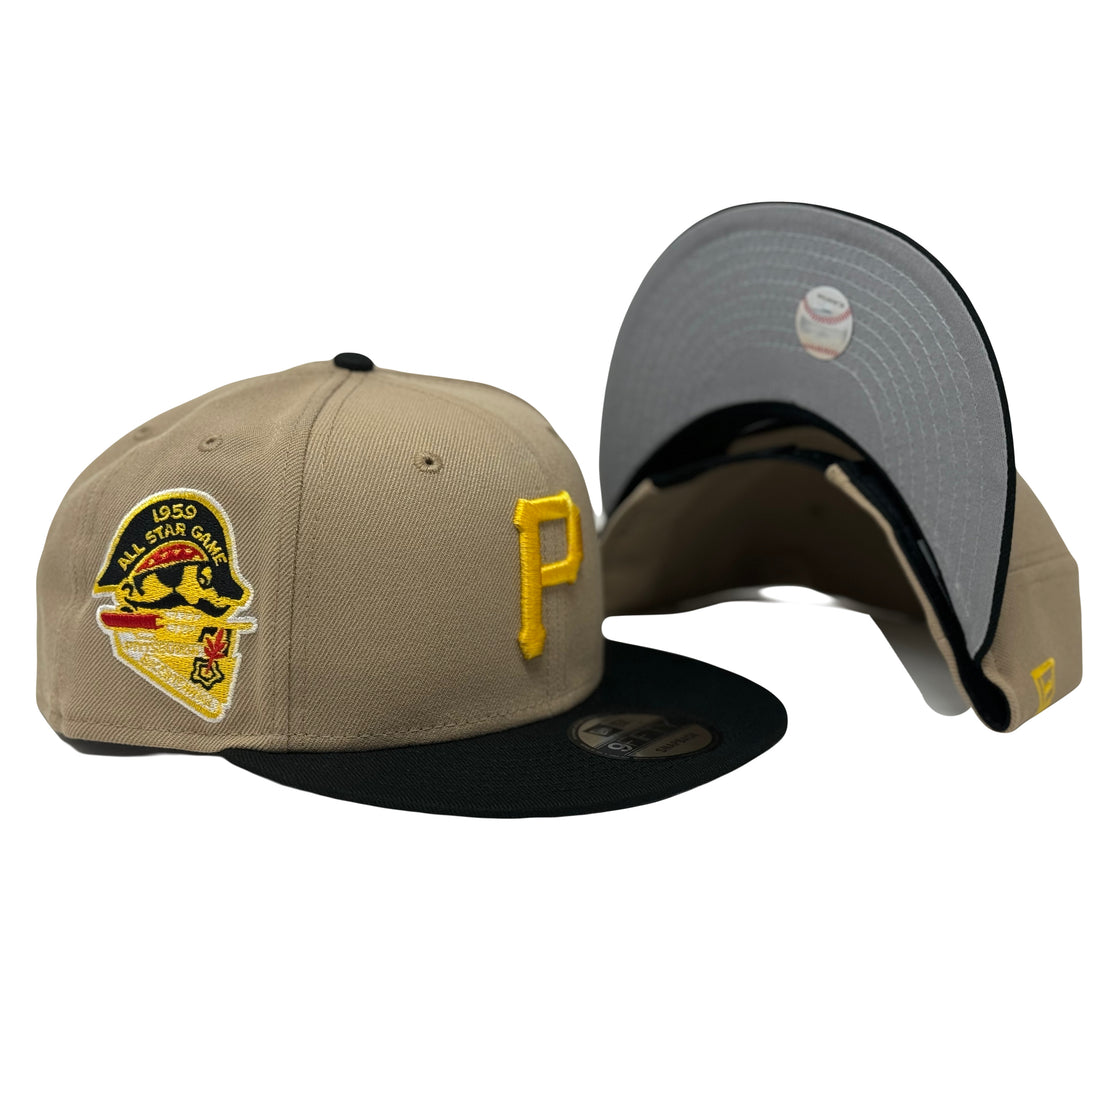 Pittsburgh Pirates 1959 All Star Game Camel 9Fifty New Era Snapback Hat